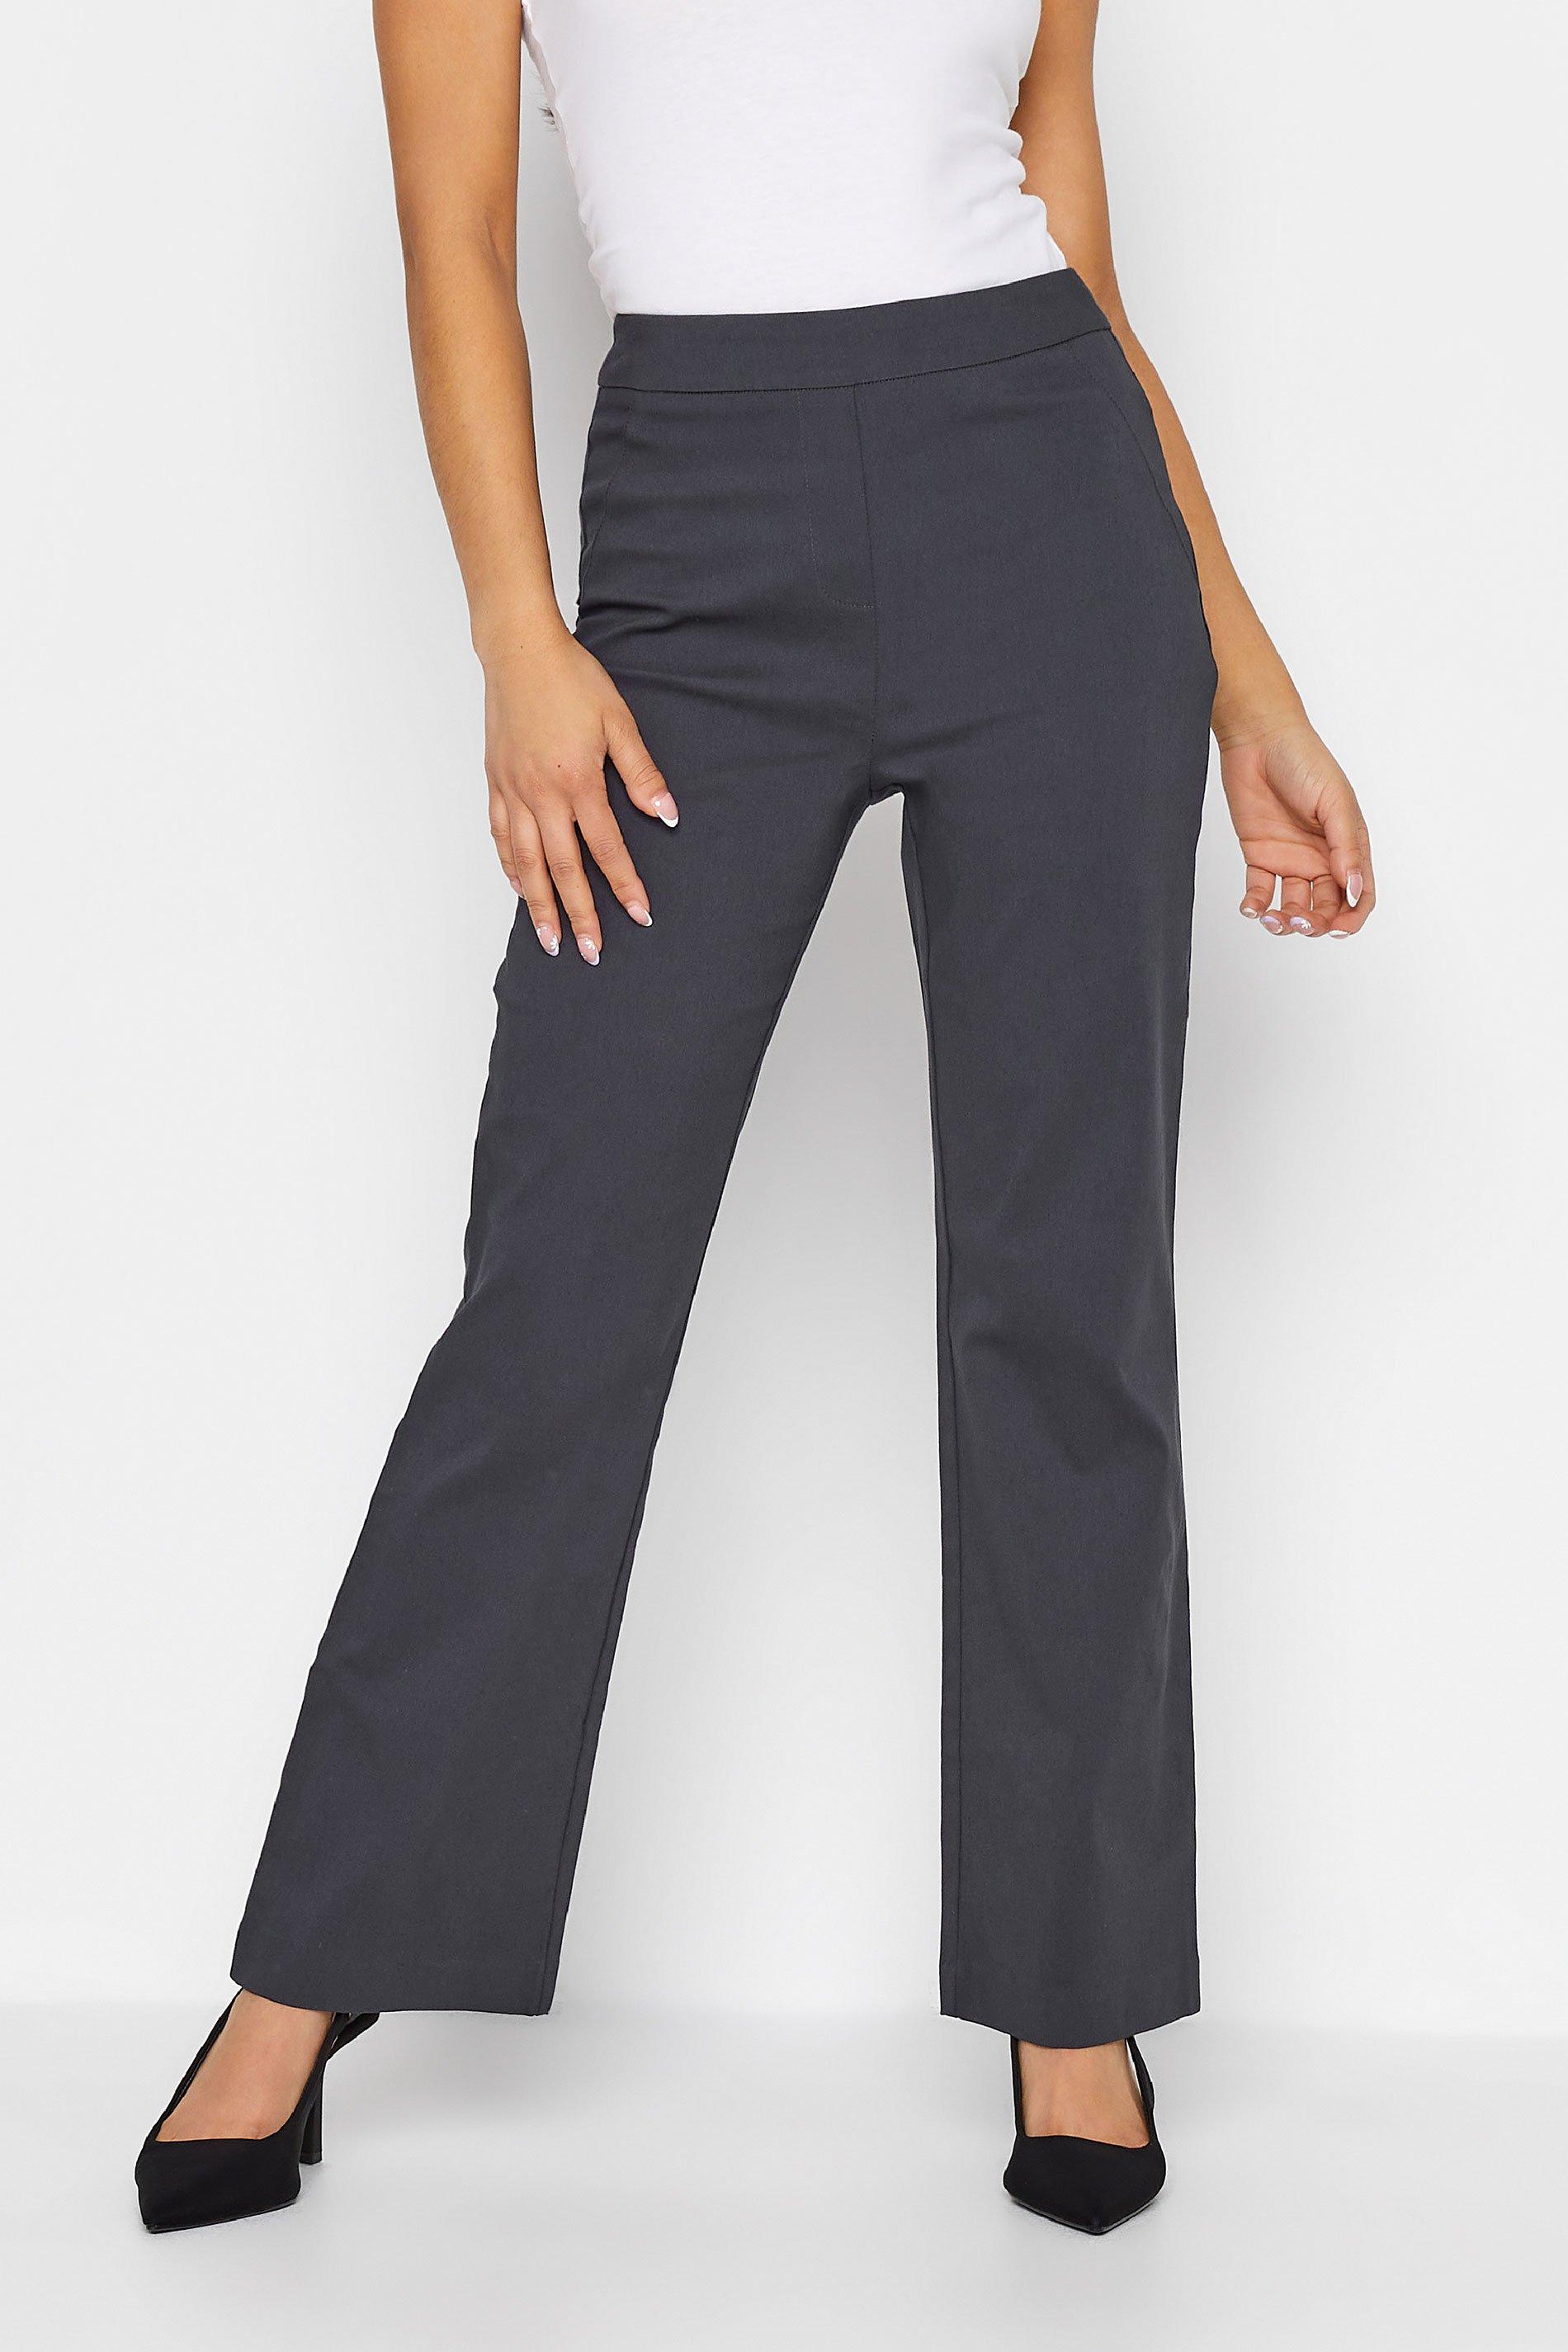 Buy Friends Like These Black Petite Tailored Ankle Grazer Trousers from the  Next UK online shop | Straight leg trousers, Trousers, Smart trousers